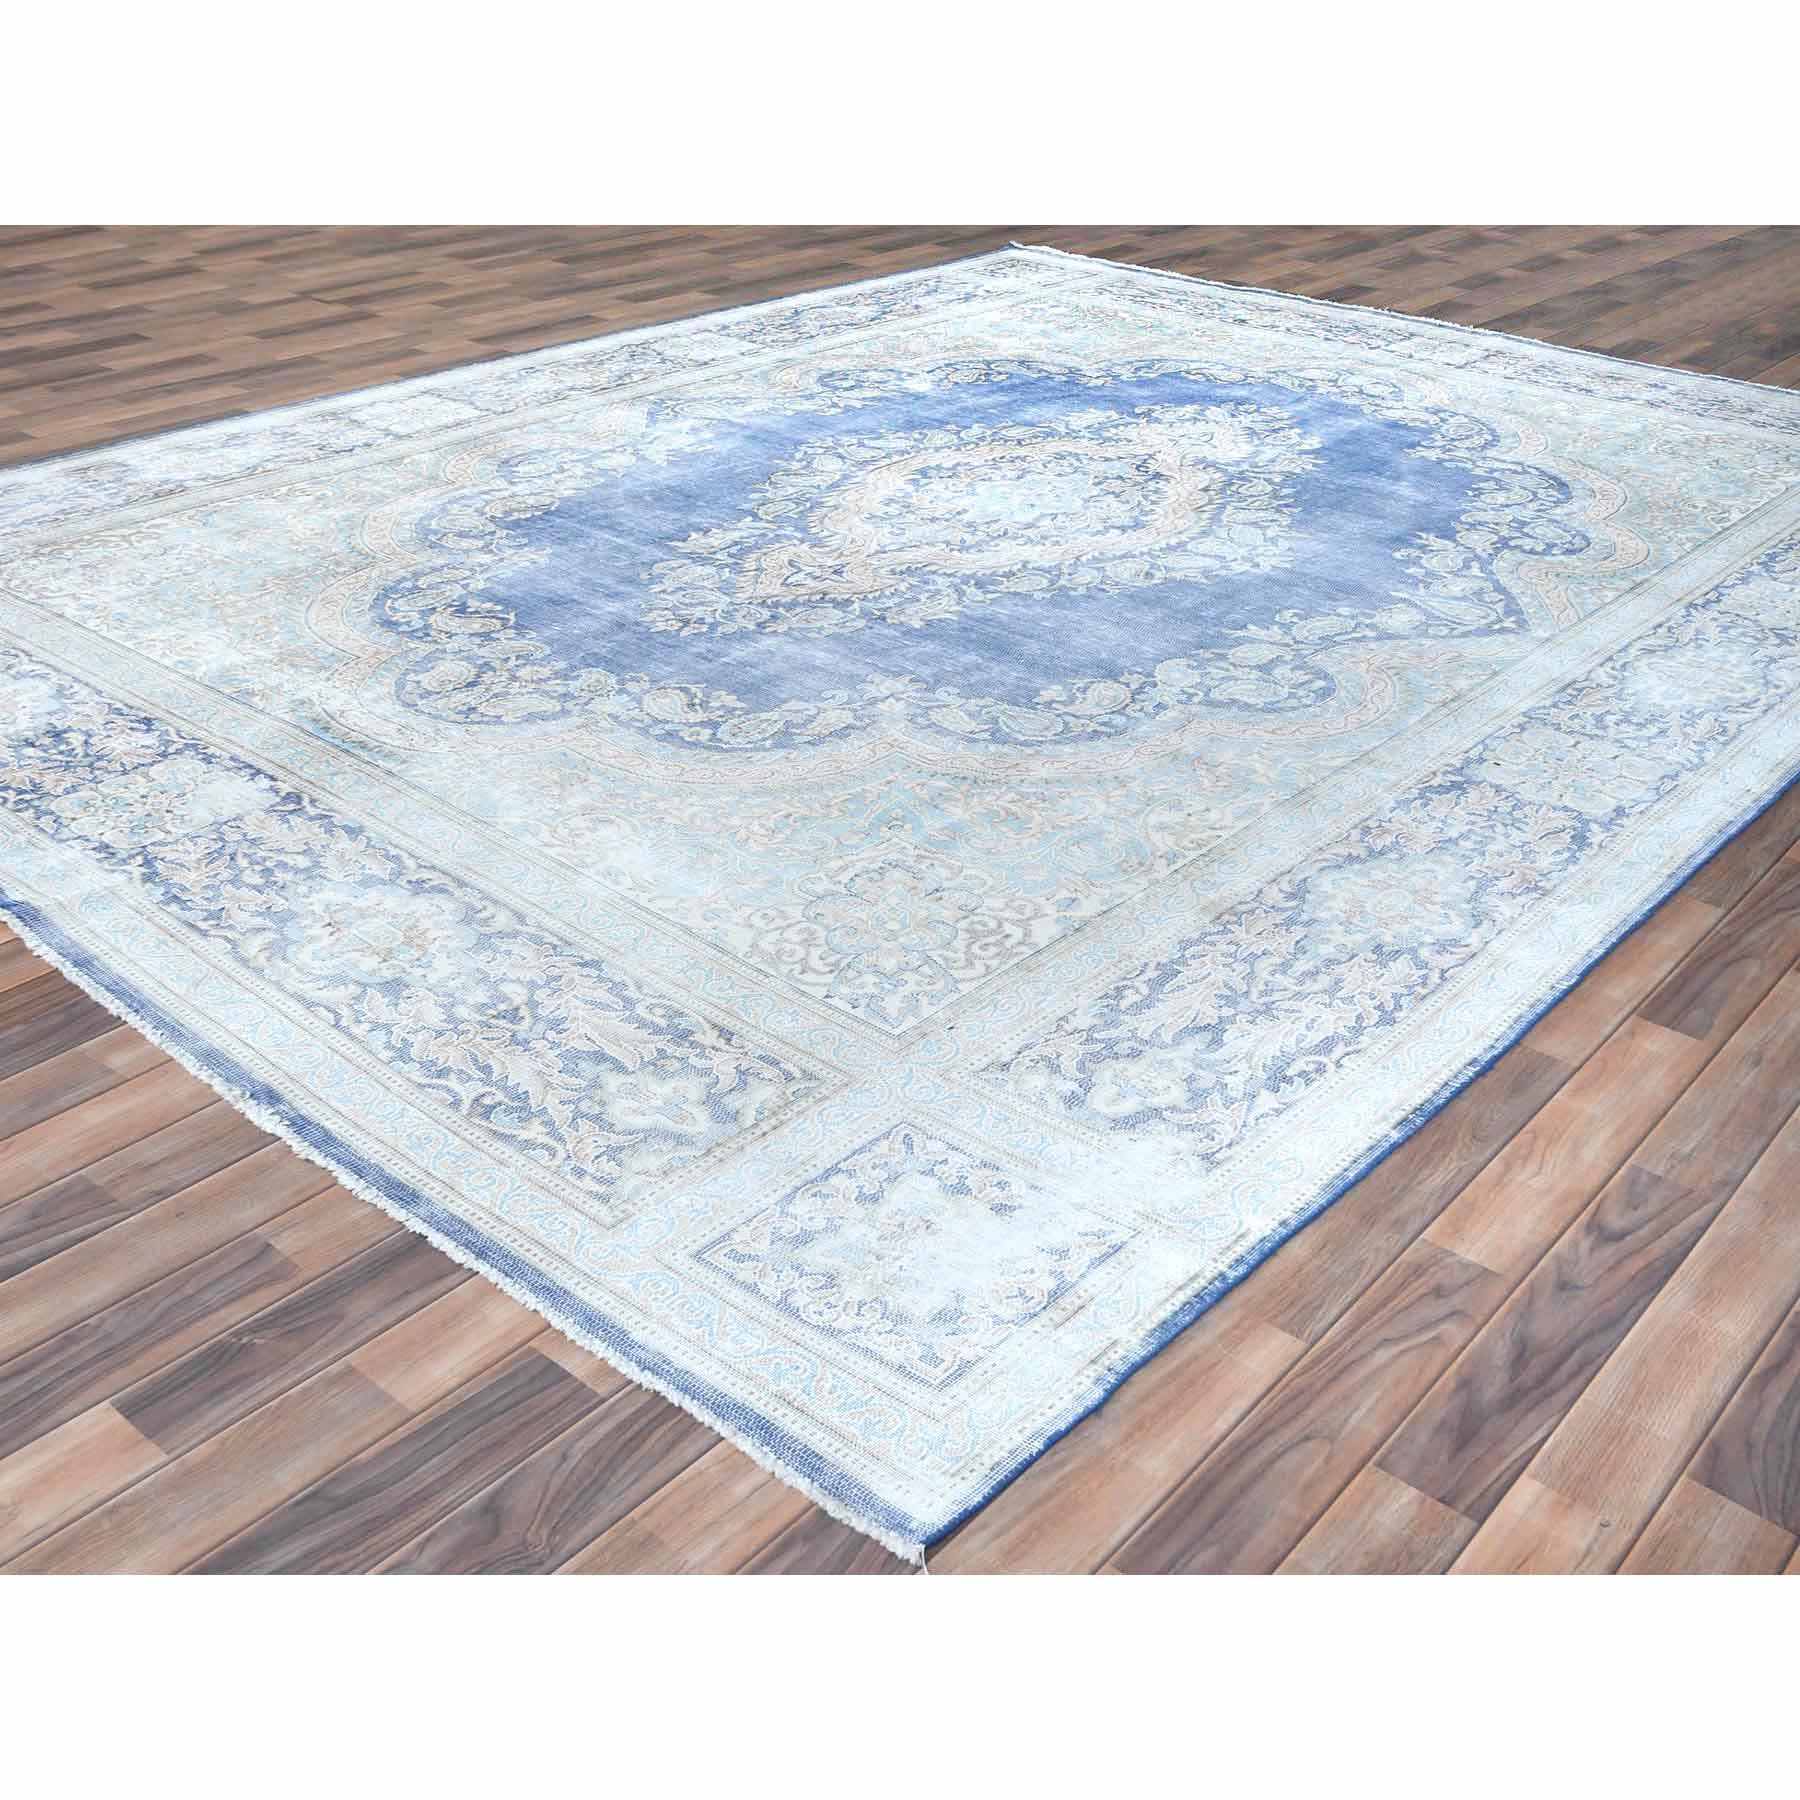 Overdyed-Vintage-Hand-Knotted-Rug-406265